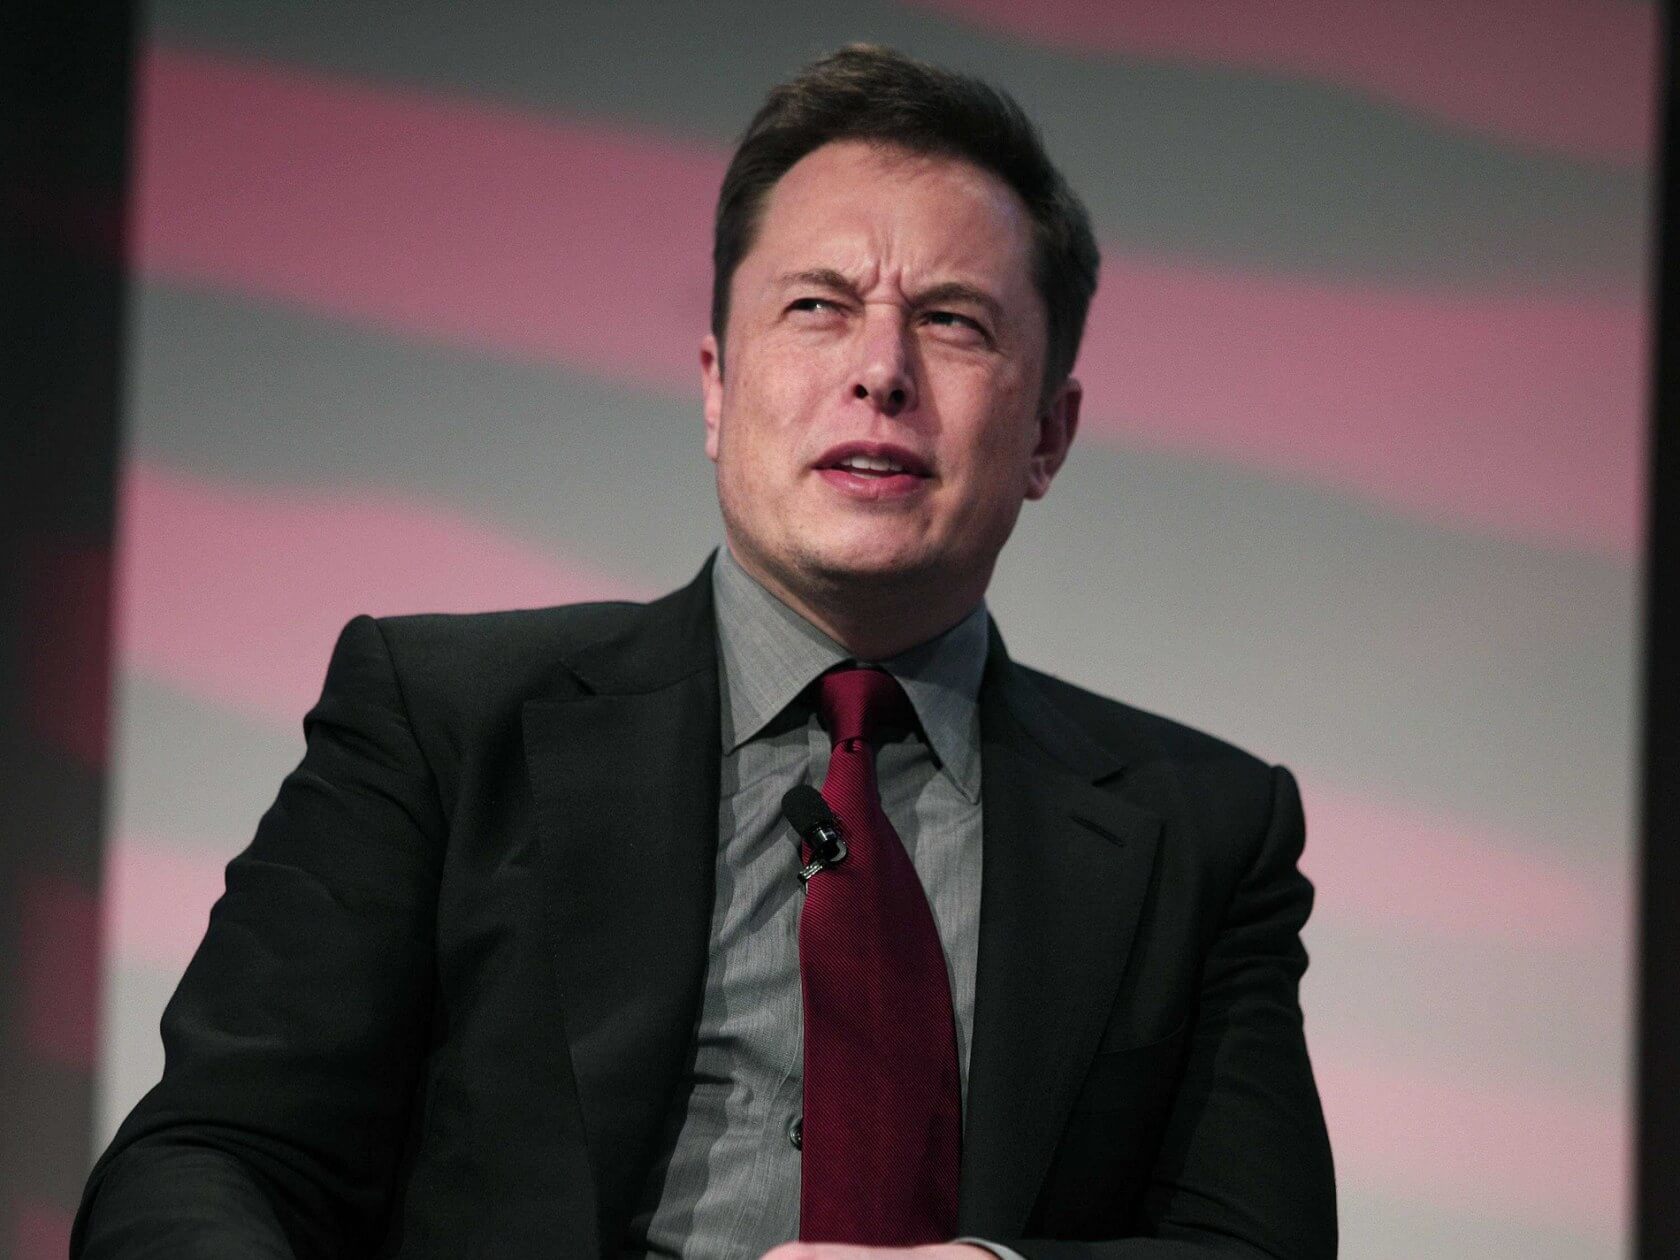 Elon Musk says lockdown is fascist and forcibly imprisoning people in their homes